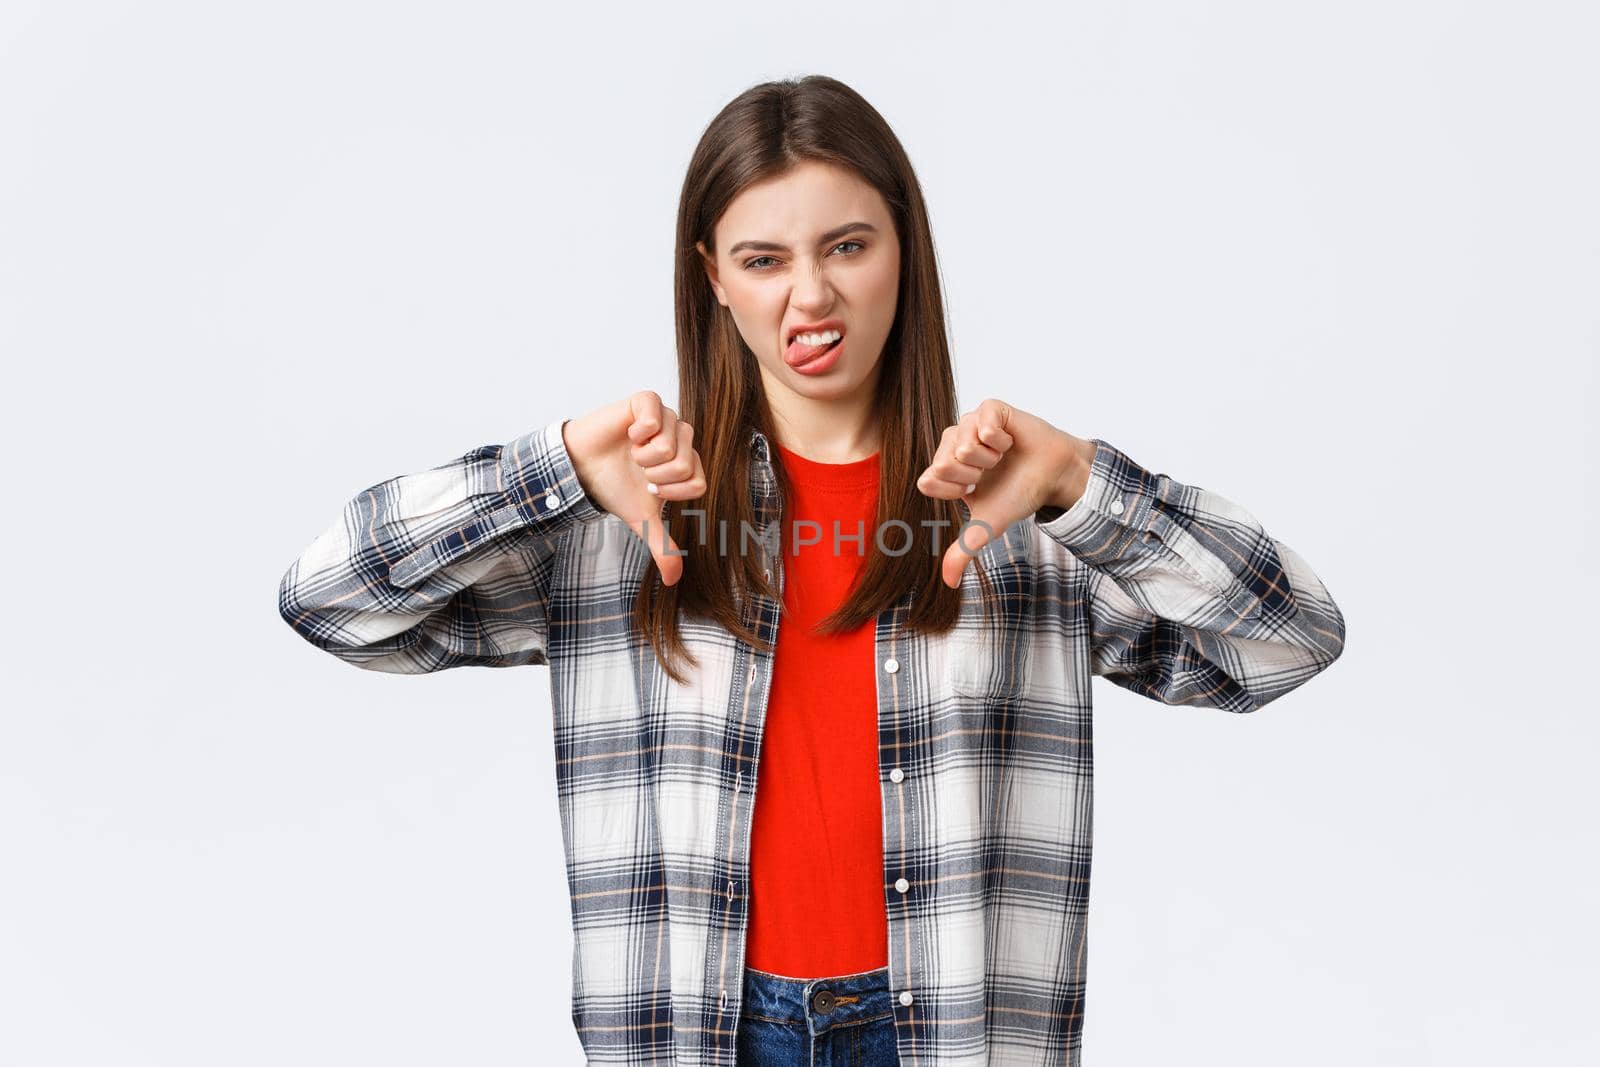 Lifestyle, different emotions, leisure activities concept. Displeased and unimpressed young picky girl in checked shirt, thumb-down and show tongue to express dislike, rate awful movie.